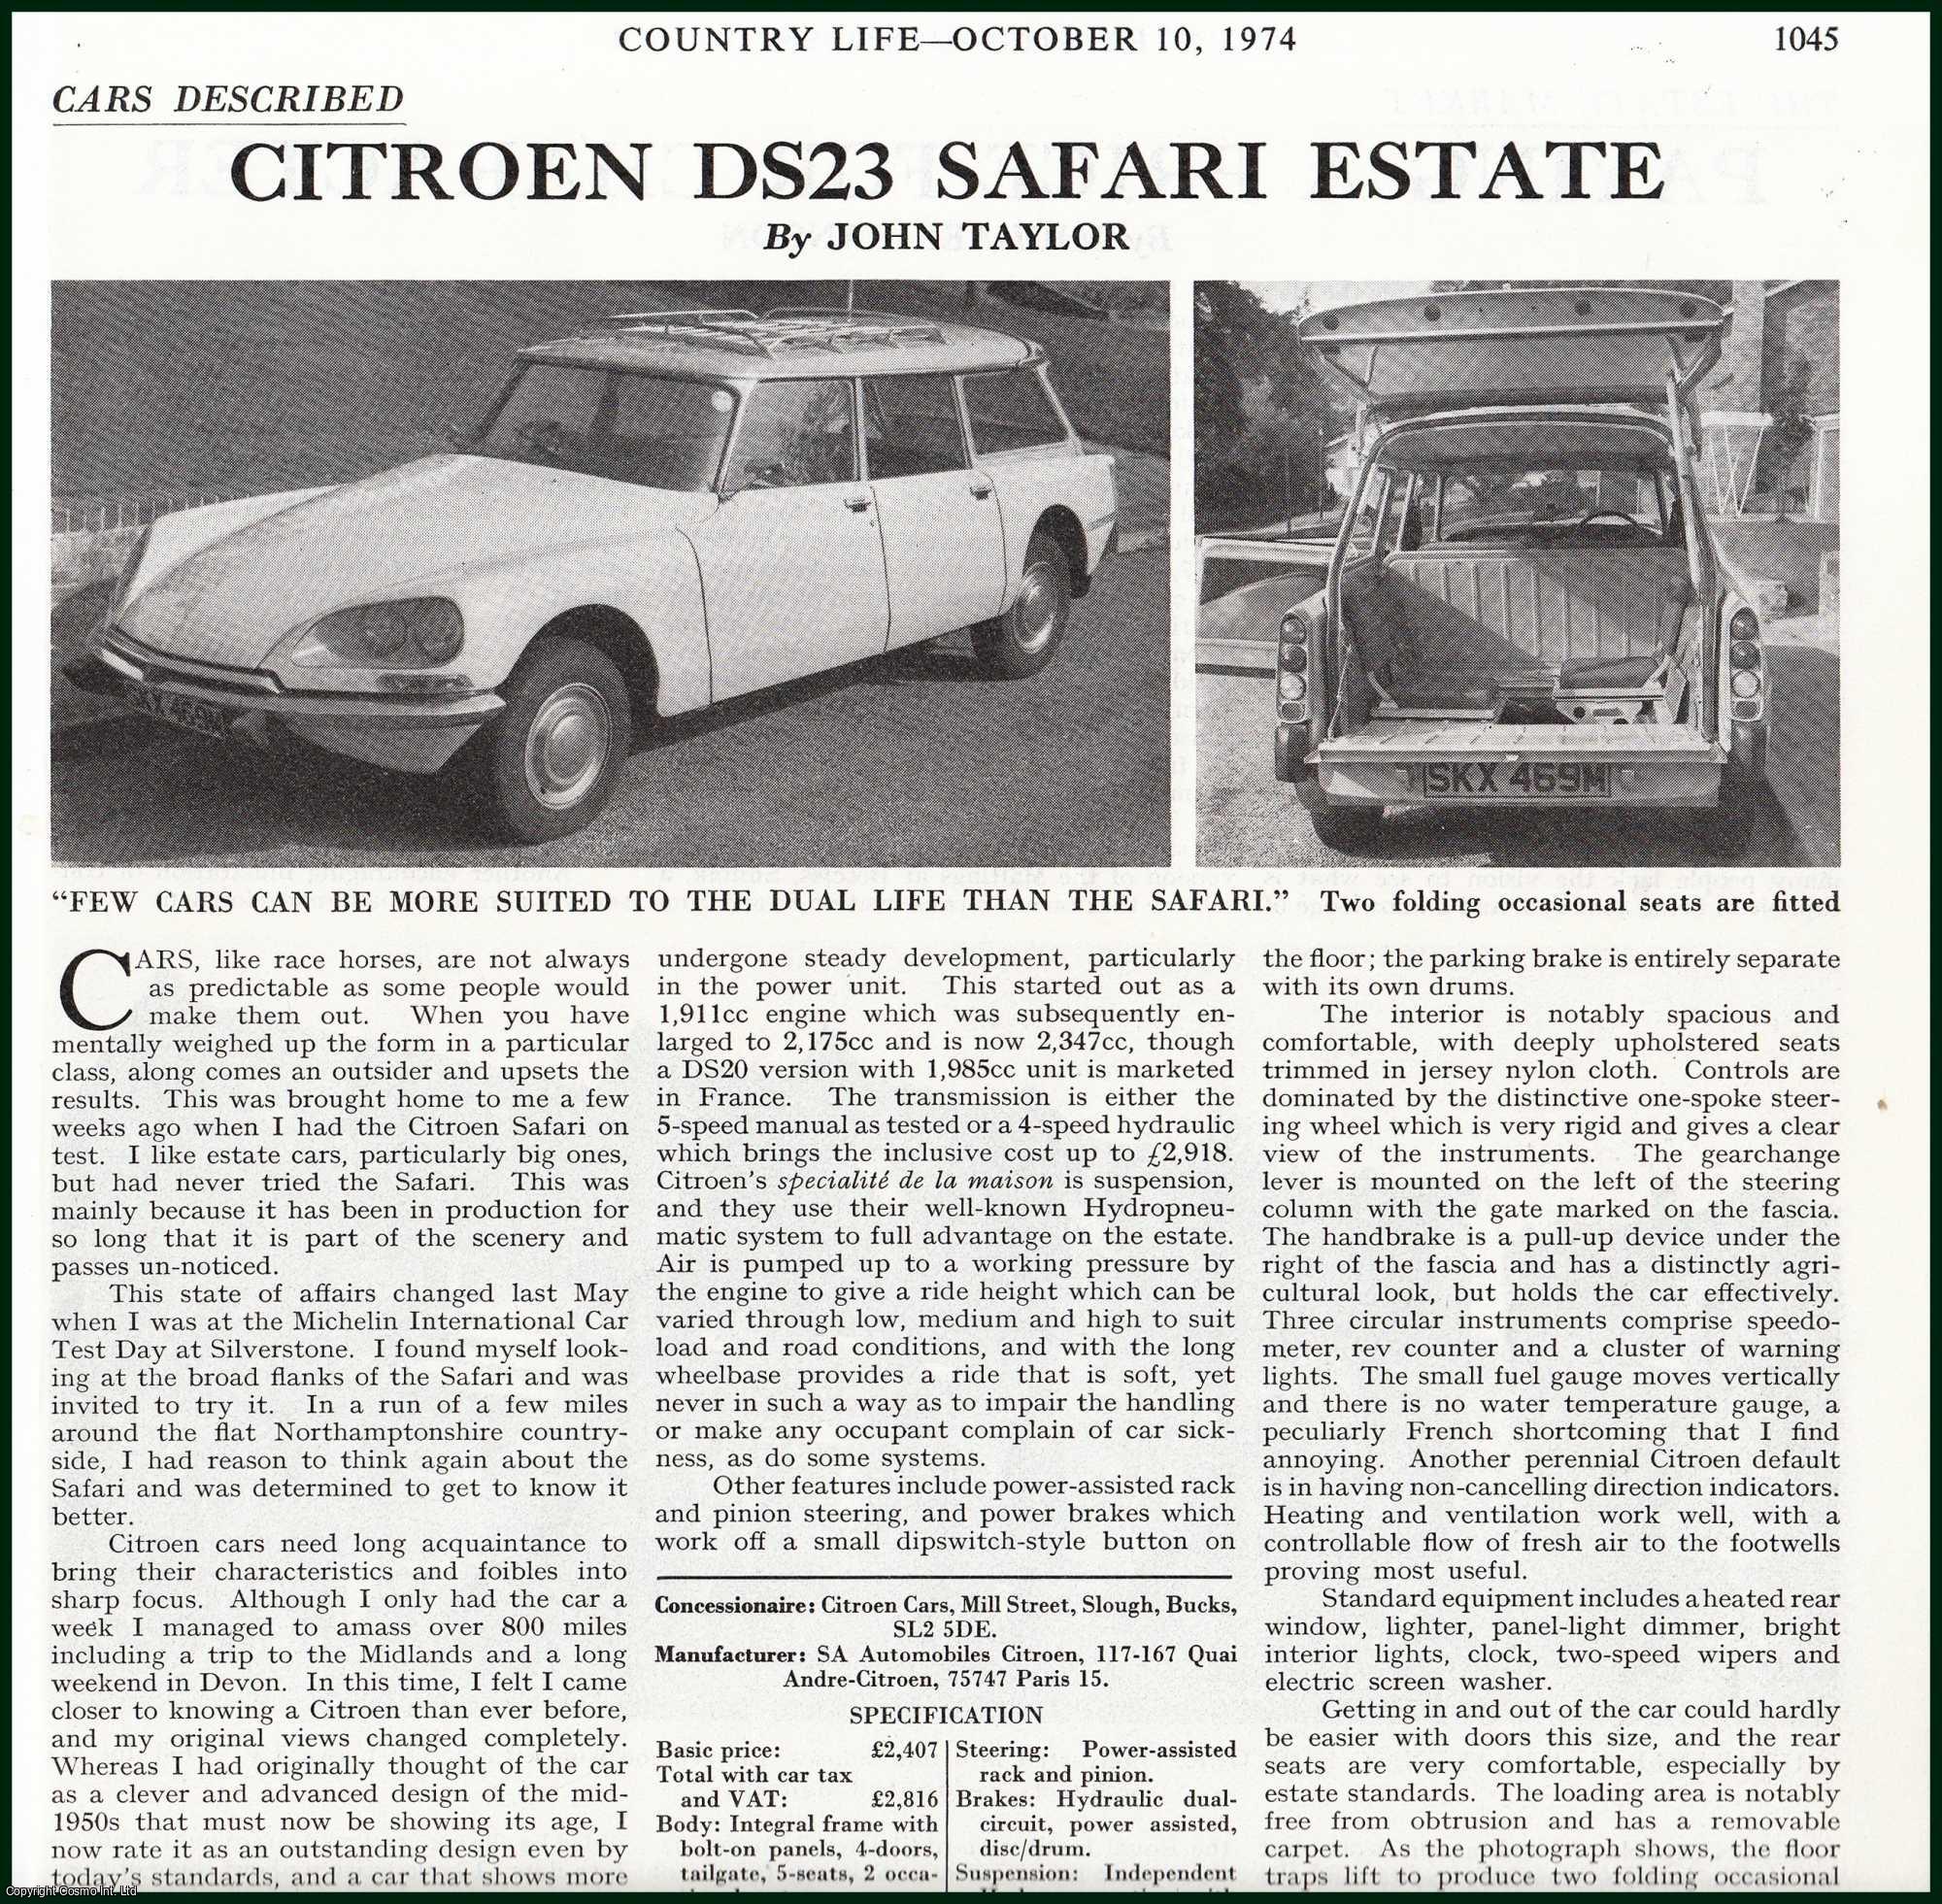 Country Life Magazine - Citroen DS23 Safari Estate Car. Two pictures and accompanying text, removed from an original issue of Country Life Magazine, 1974.